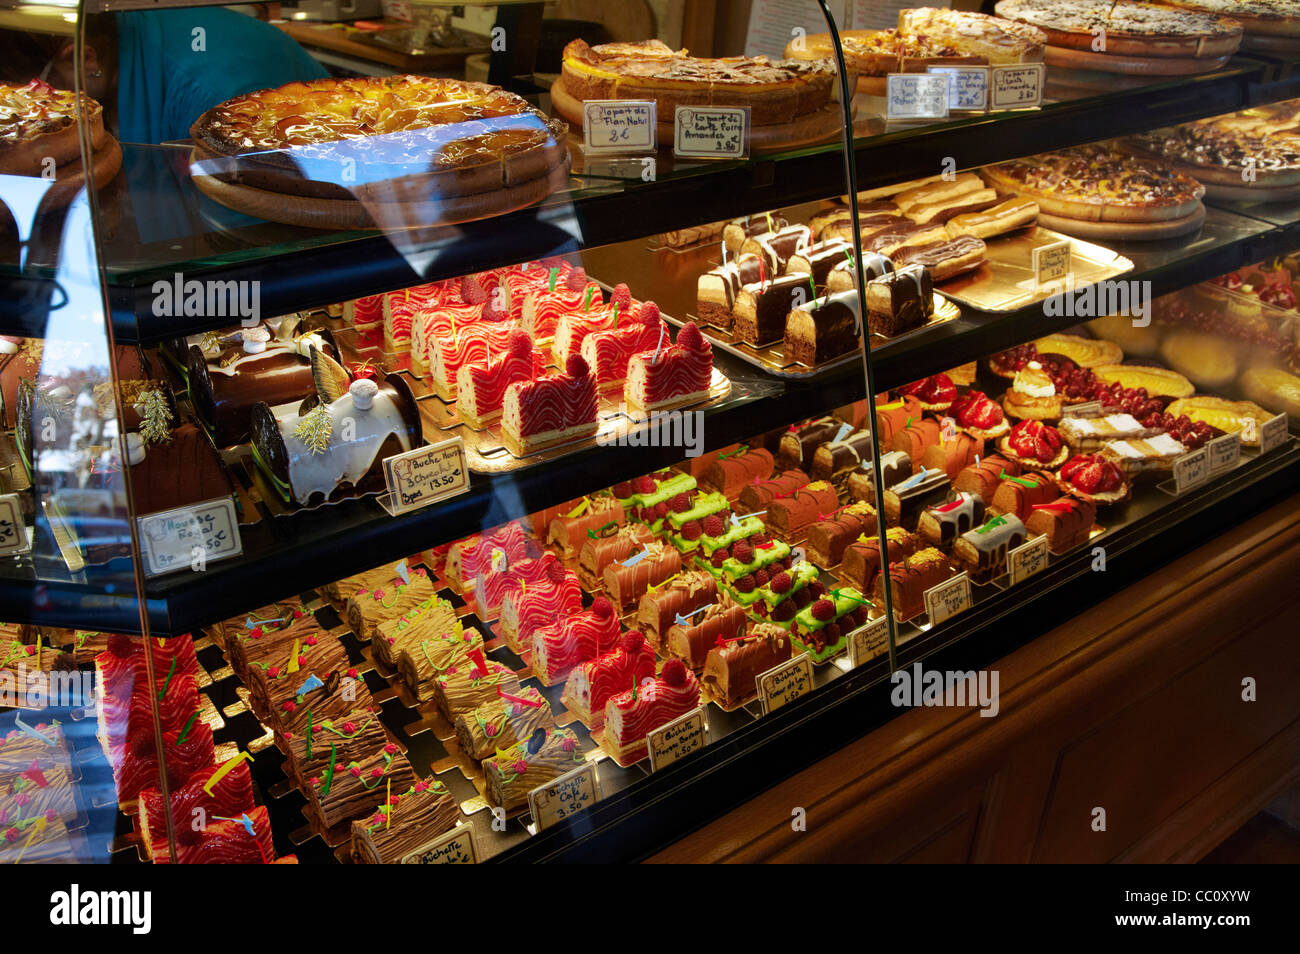 Christmas patisserie display in Boulangerie Alexandra, a popular bakery in the suburbs of Paris. Le Perreux-sur-Marne, France Stock Photo